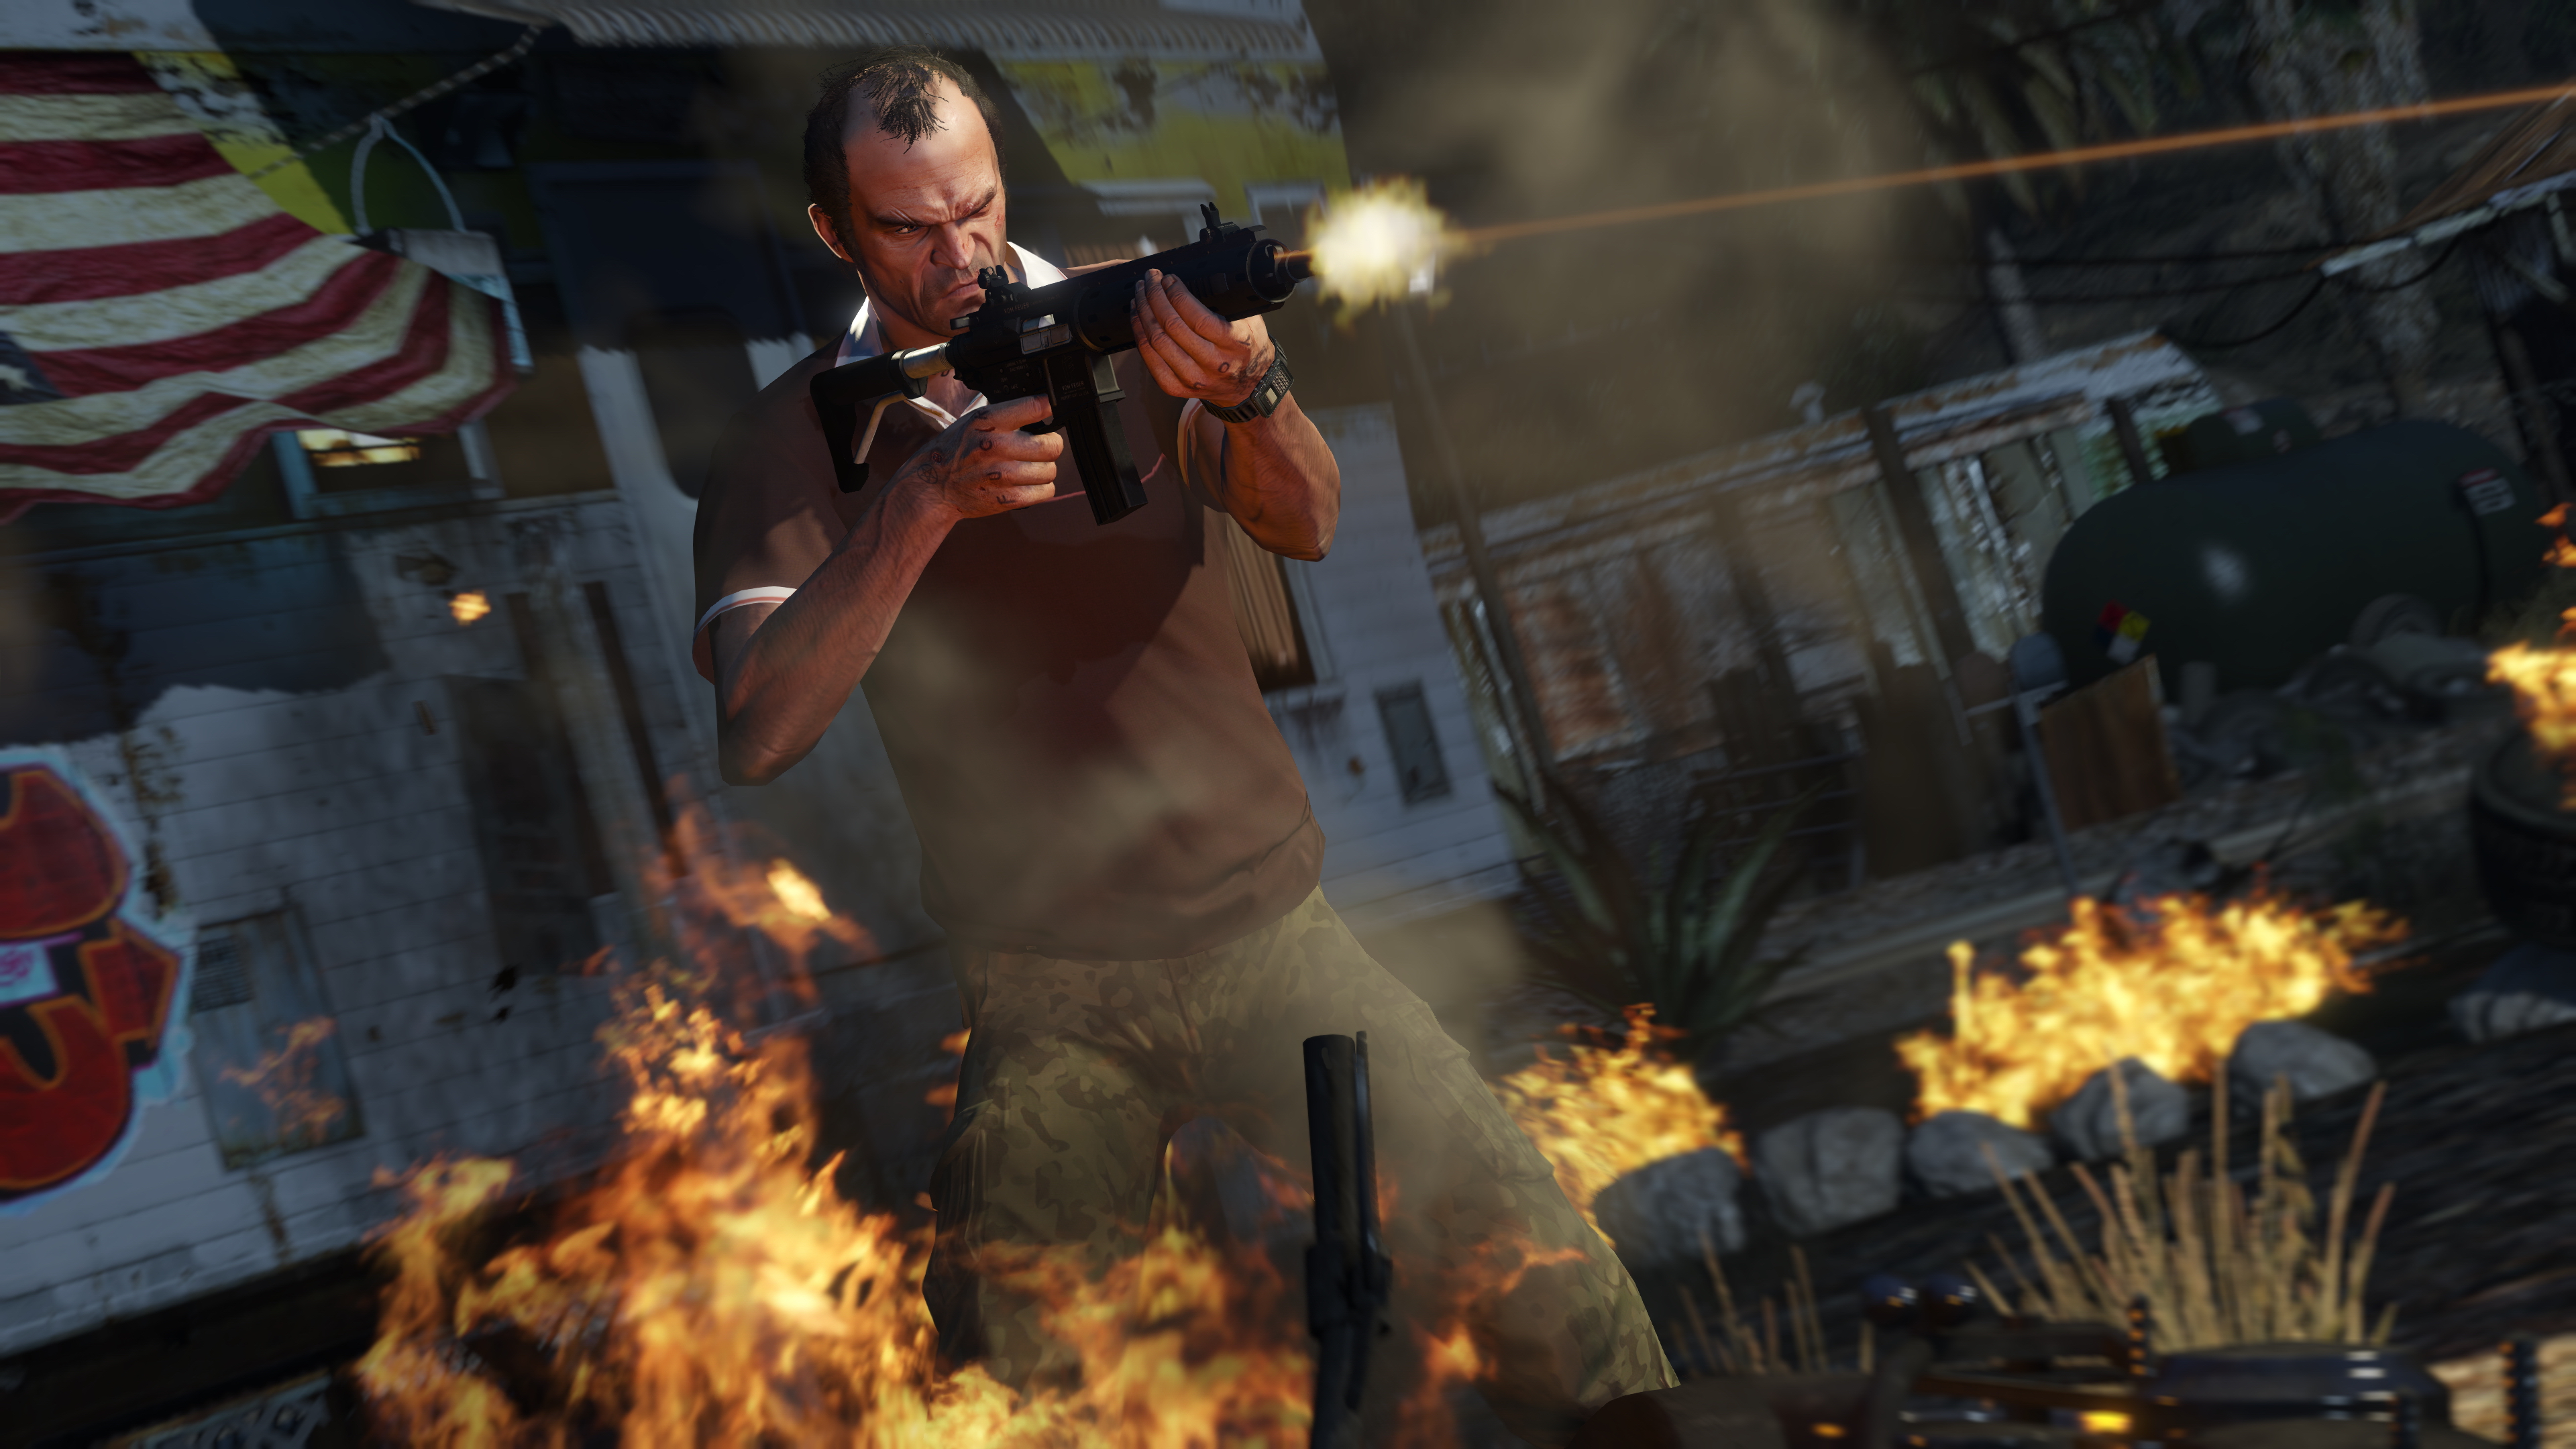 GTA 6 release update: Good news for PS4 and Xbox Grand Theft Auto fans  following Rockstar, Gaming, Entertainment